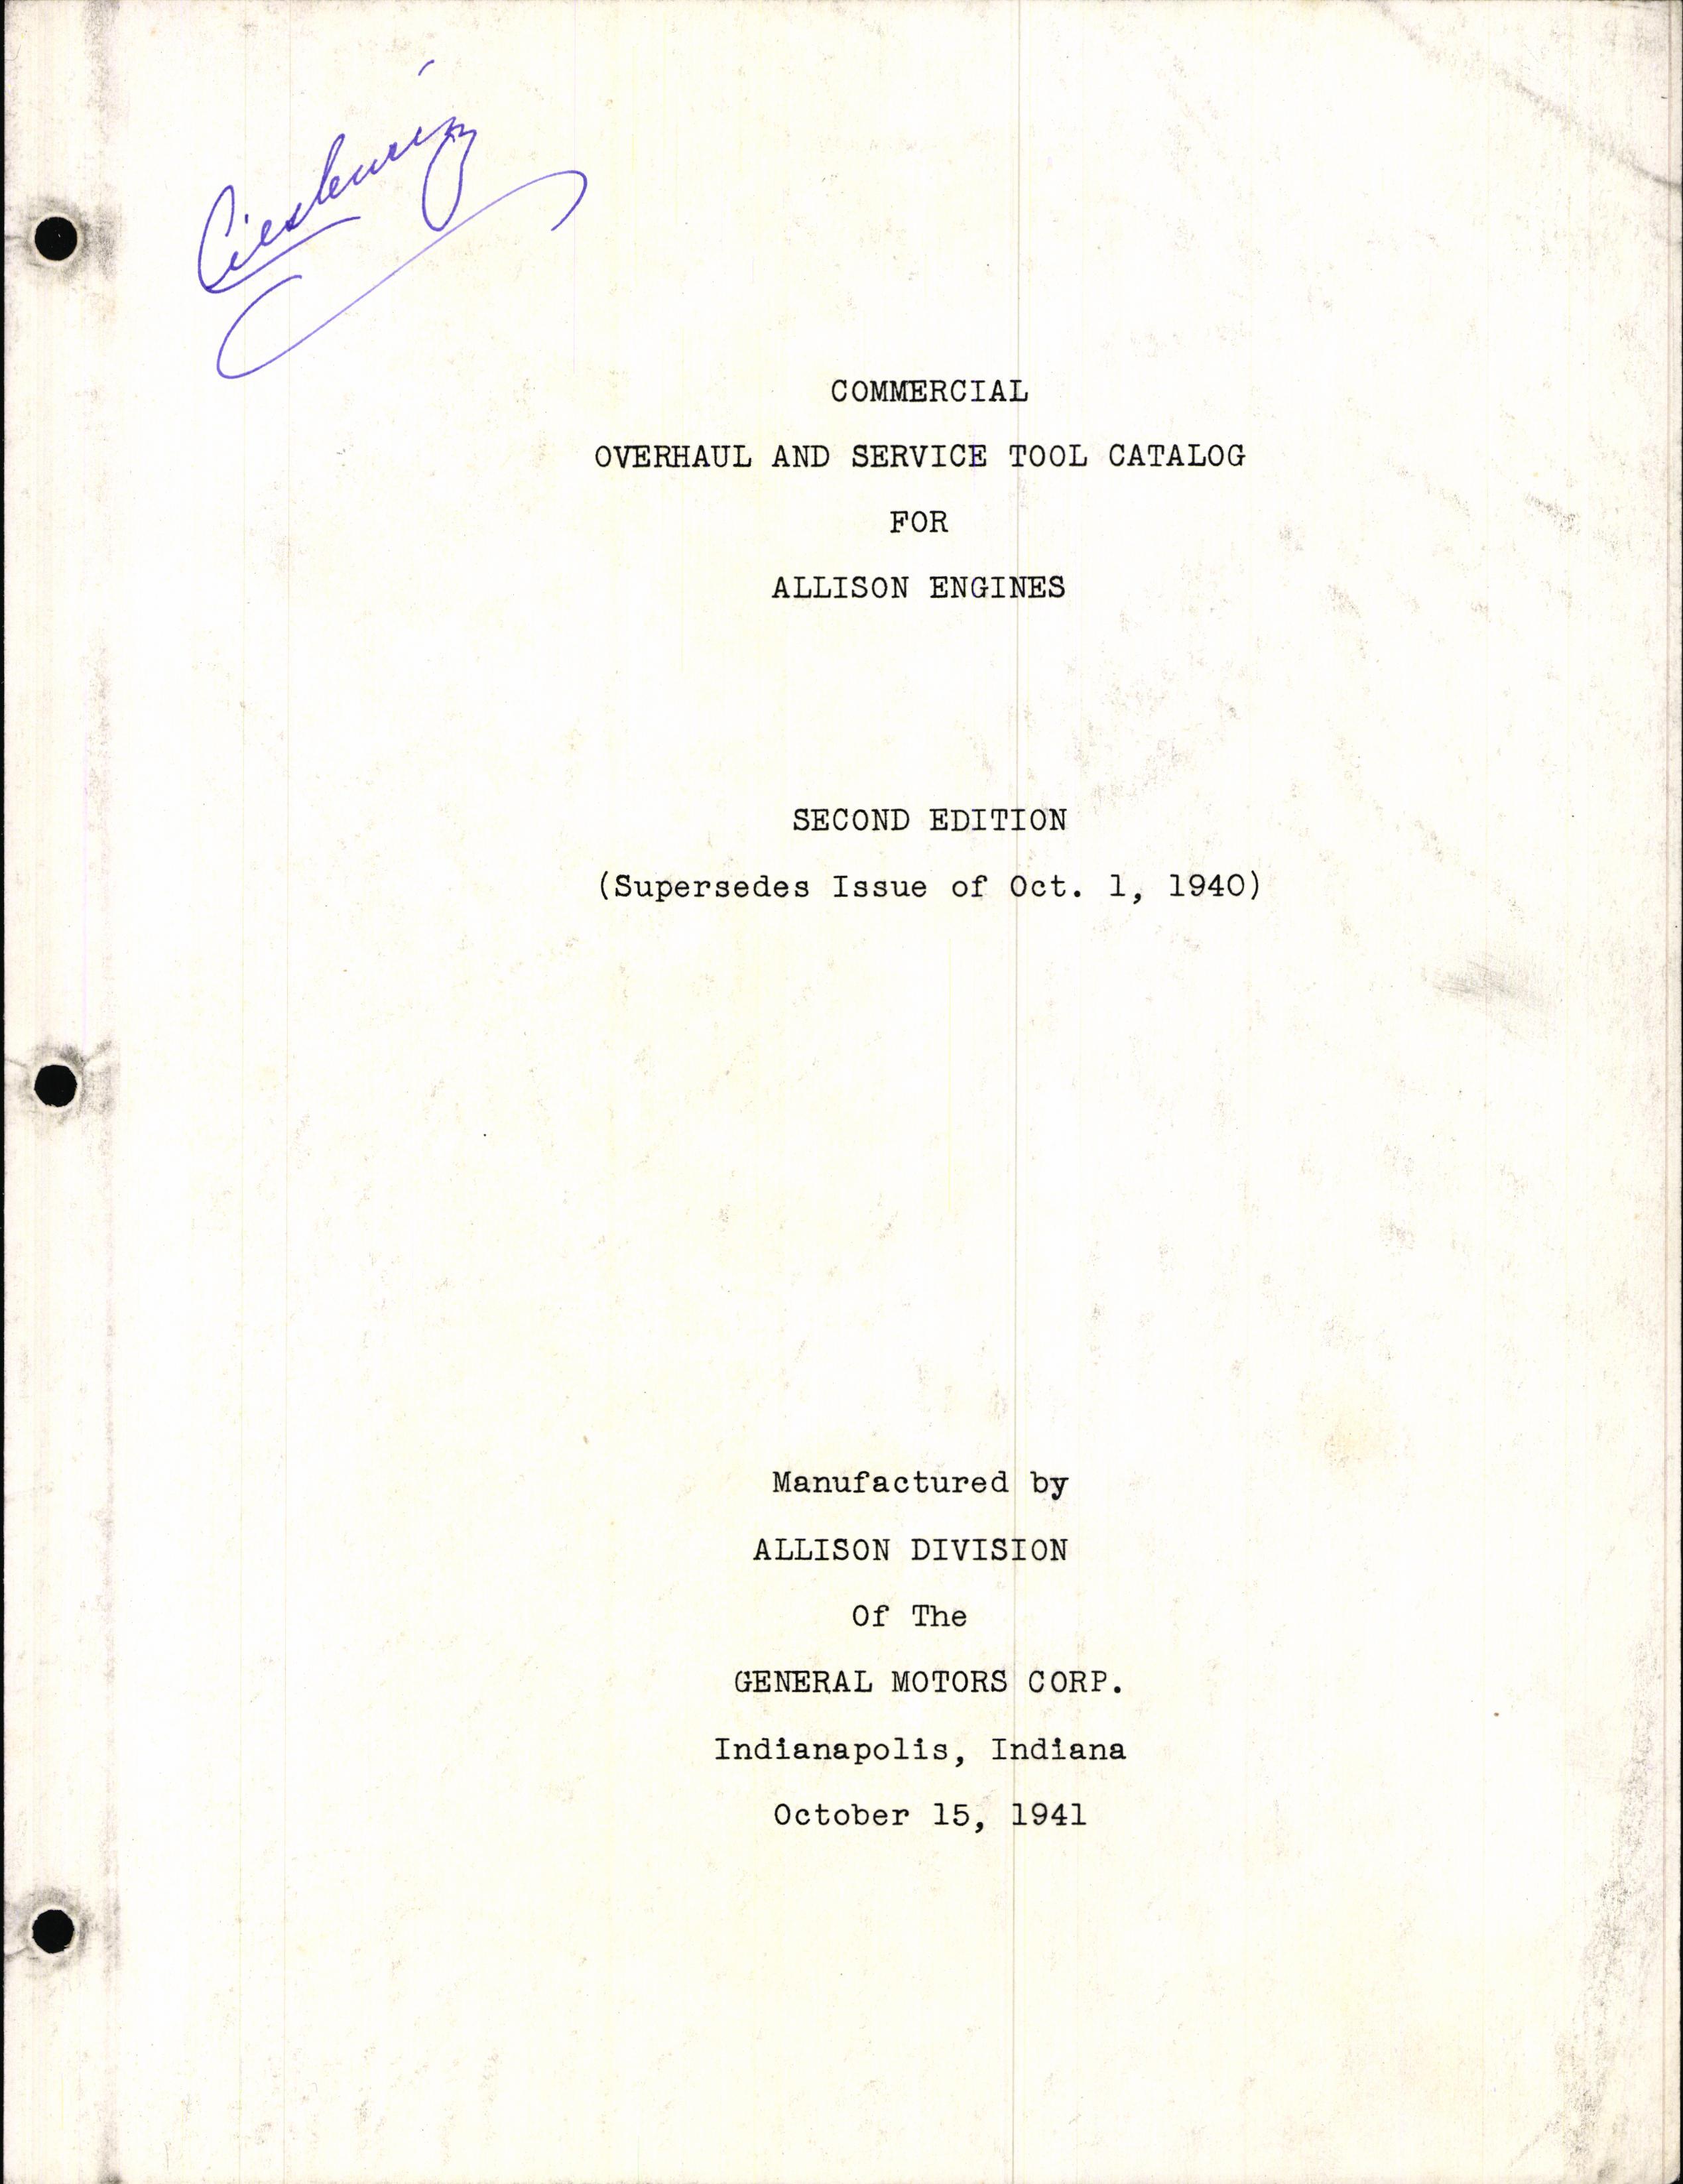 Sample page 1 from AirCorps Library document: Commercial Overhaul and Service Tool Catalog for Allison Engines